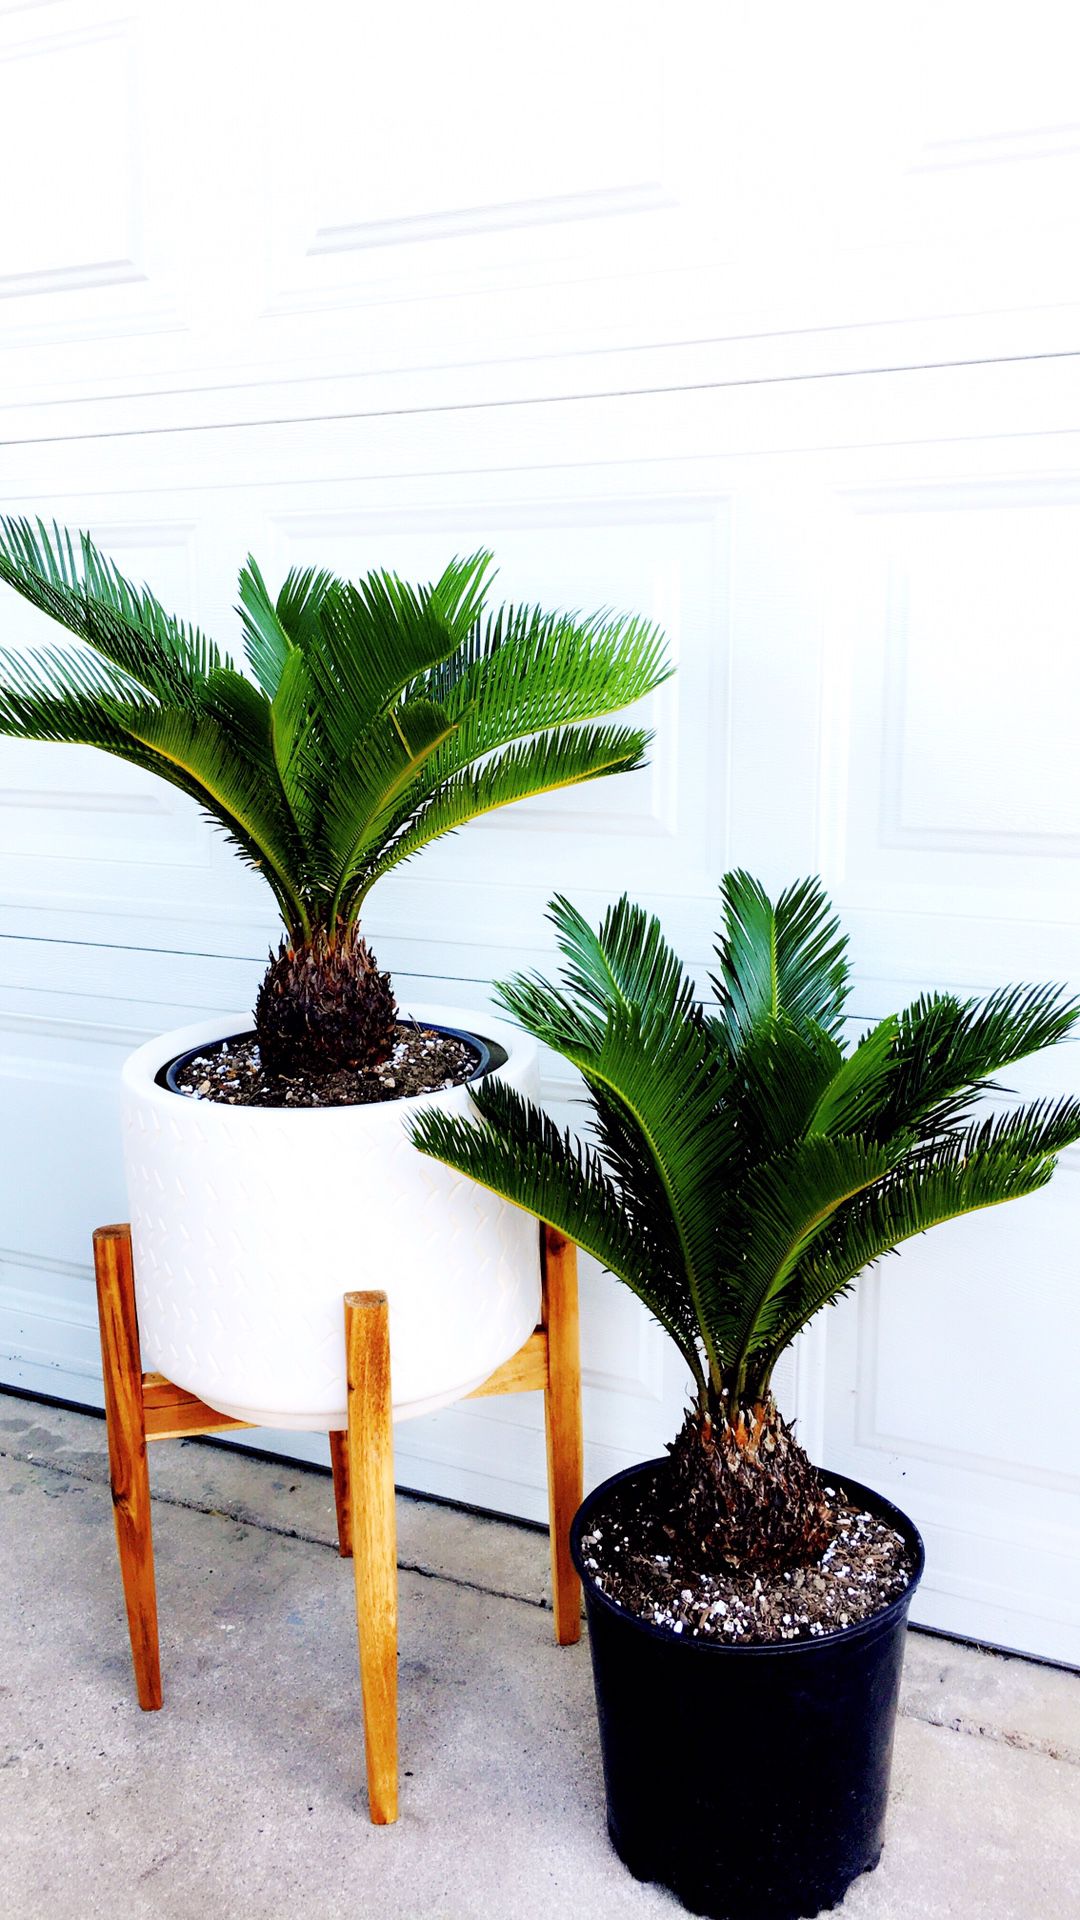 PLANT only - PLANTER IS NOT INCLUDED - SAGO PALM - Short and Solf Leaves - Good for Bonsai or Home Decorative Plant - $20 each